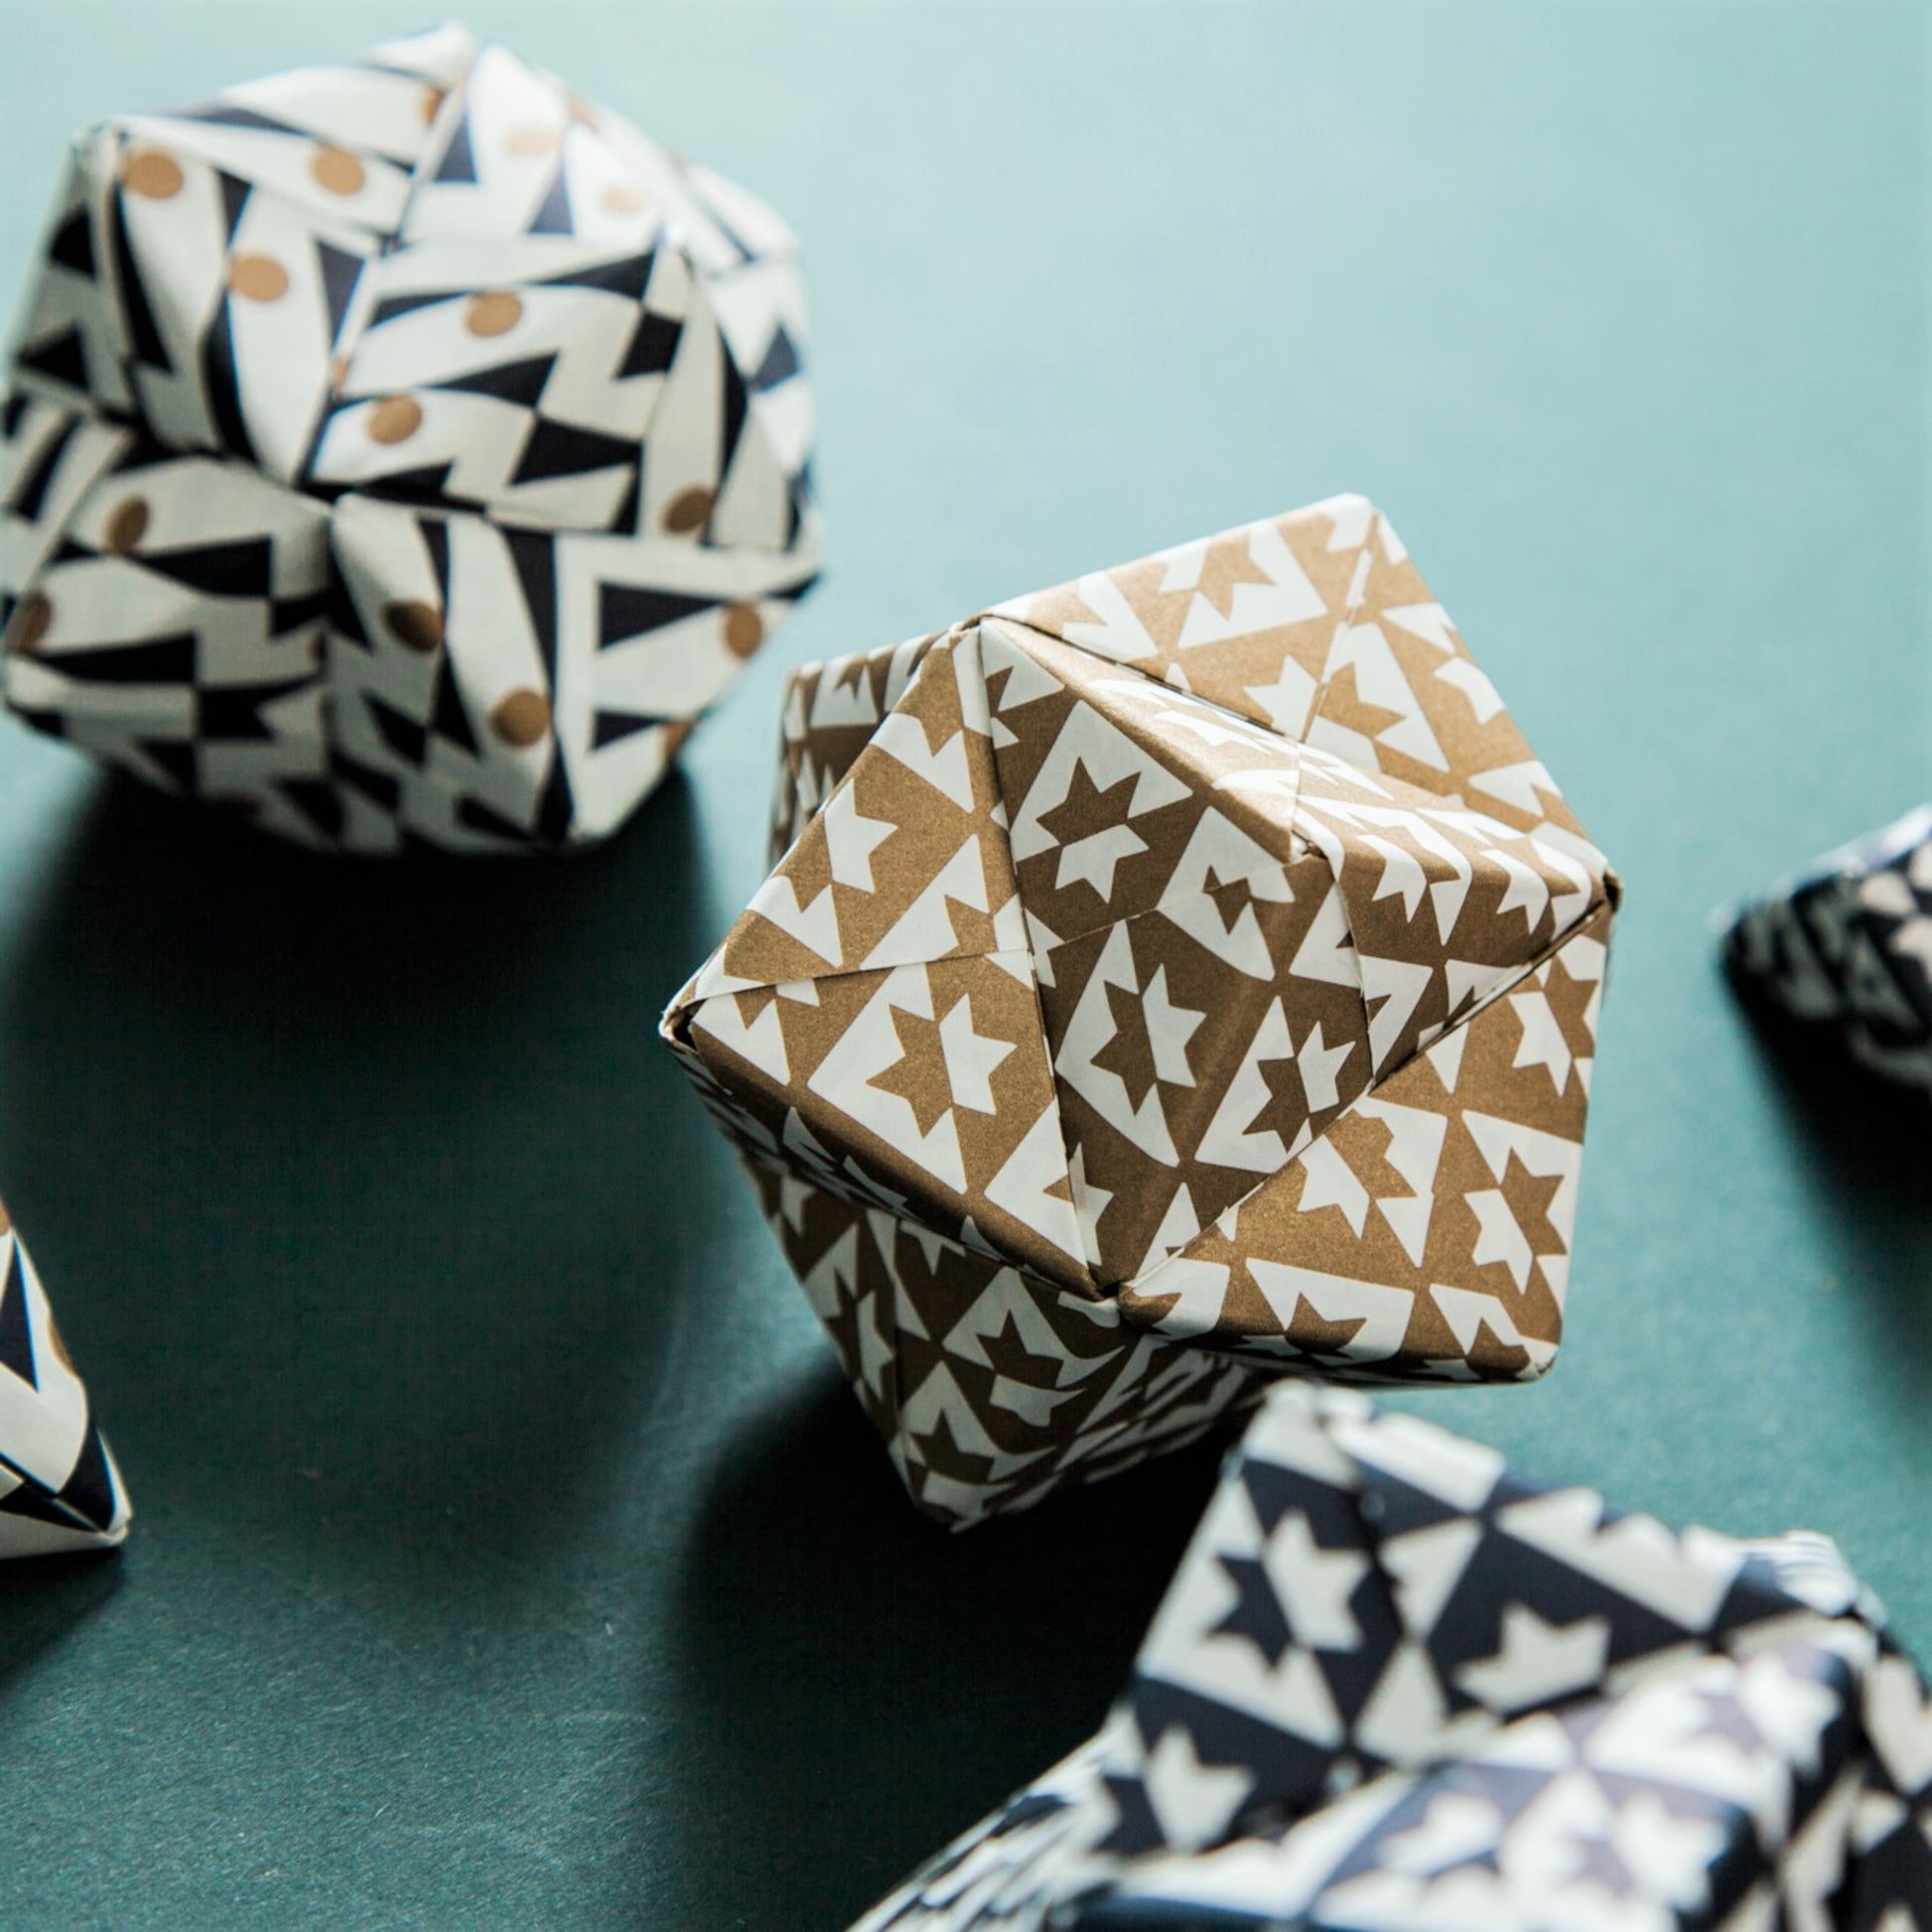 A set of patterned paper origami pyramid and bauble shaped decorations, in colours red, gold, navy and white, close-up of gold paper bauble